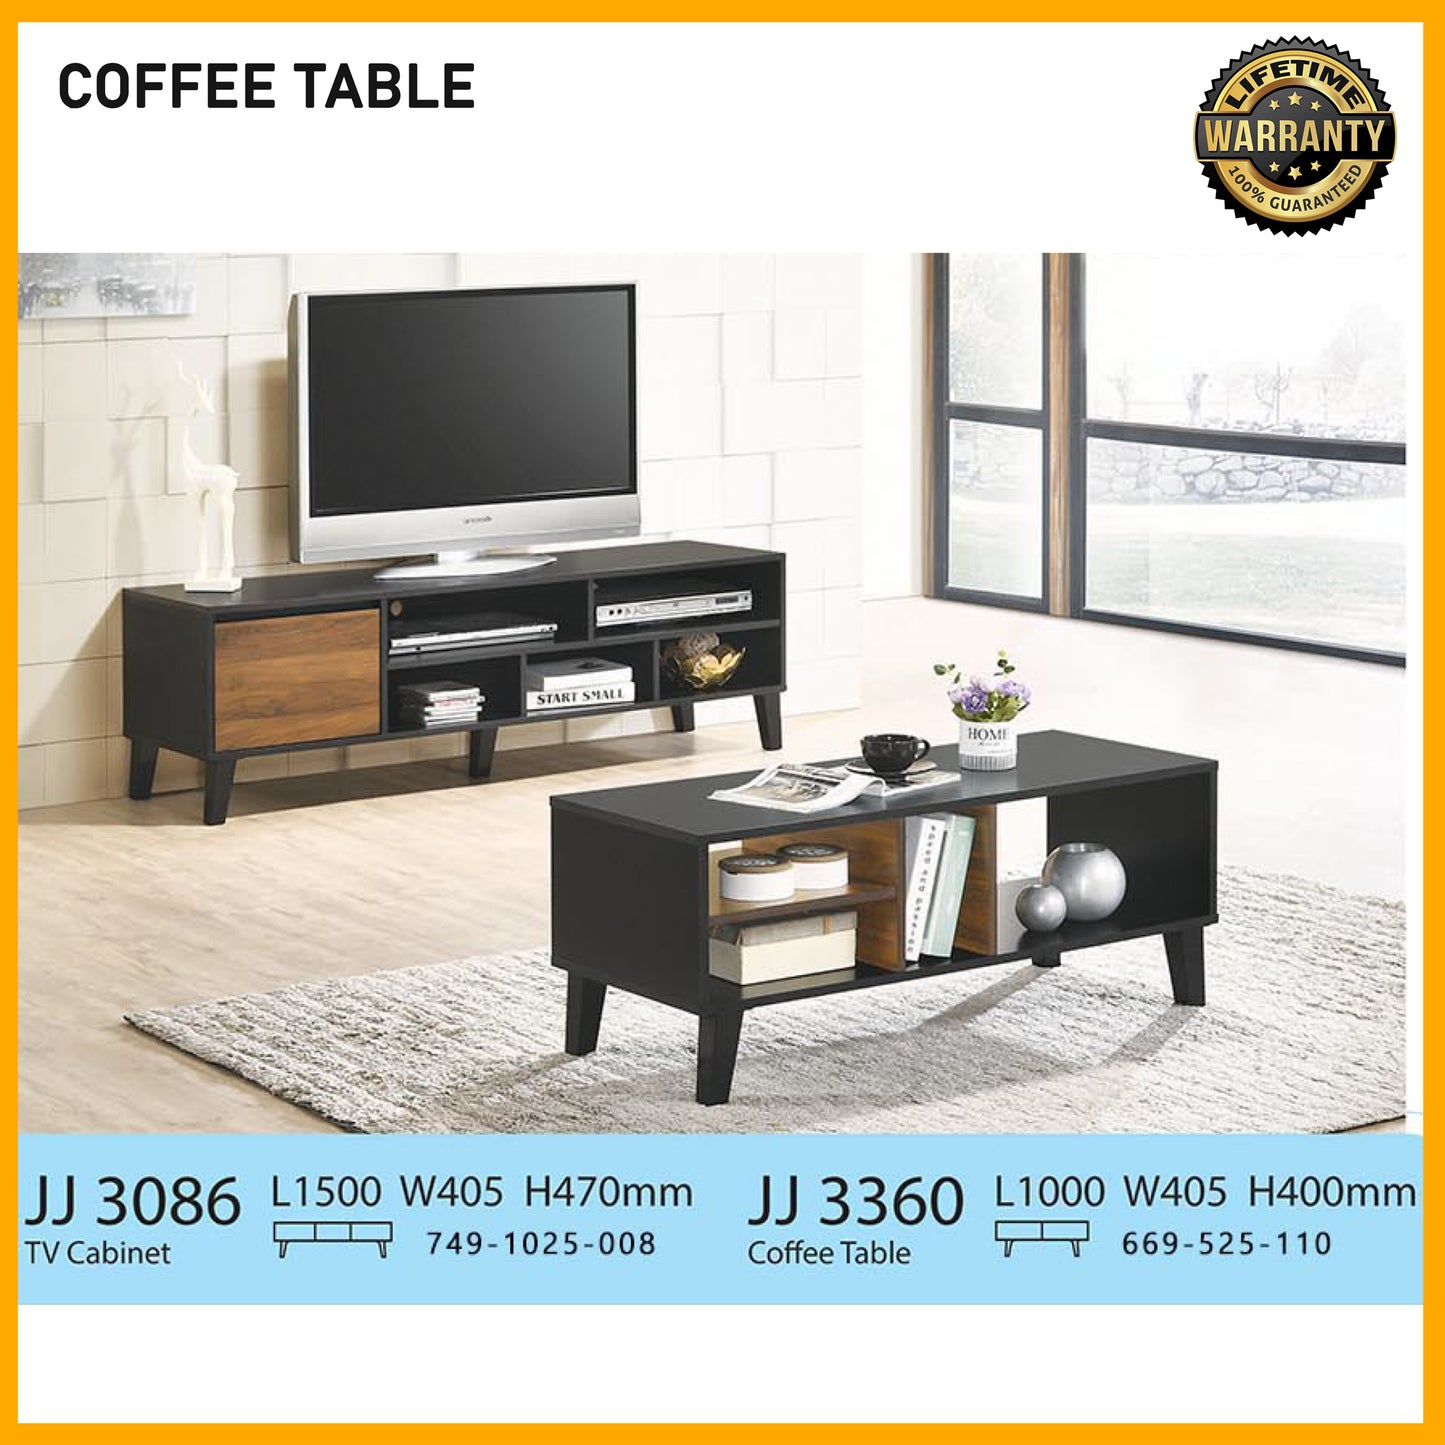 SMARTBED | Coffee Table - JJ3360